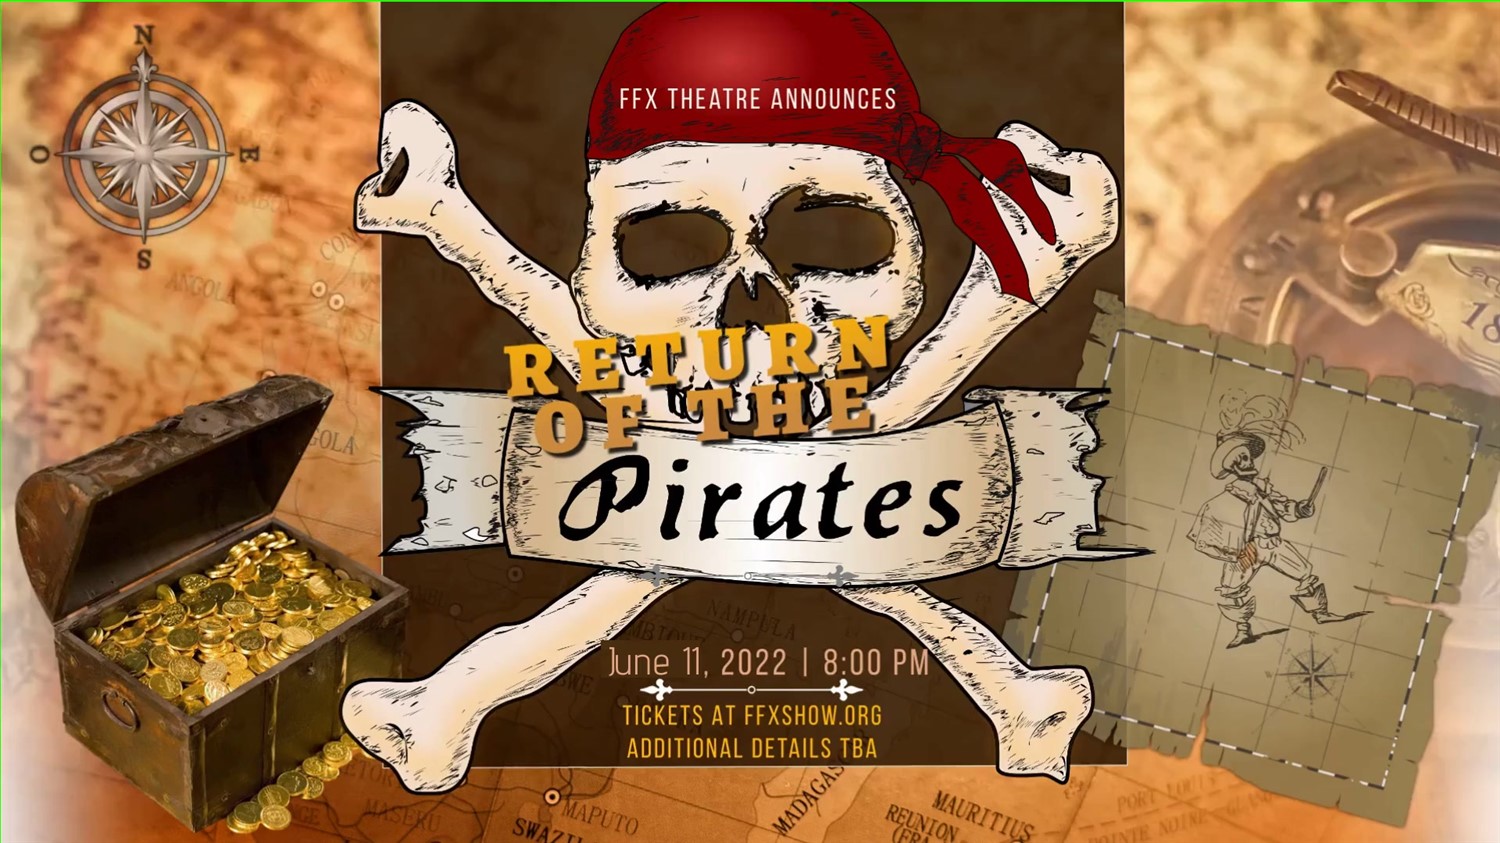 Return of the Pirates to FFX Sneaky Sneak Peek Weekend! on Jun 18, 20:00@FFX Theatre - Pick a seat, Buy tickets and Get information on Family Fun Xperience tickets.ffxshow.org